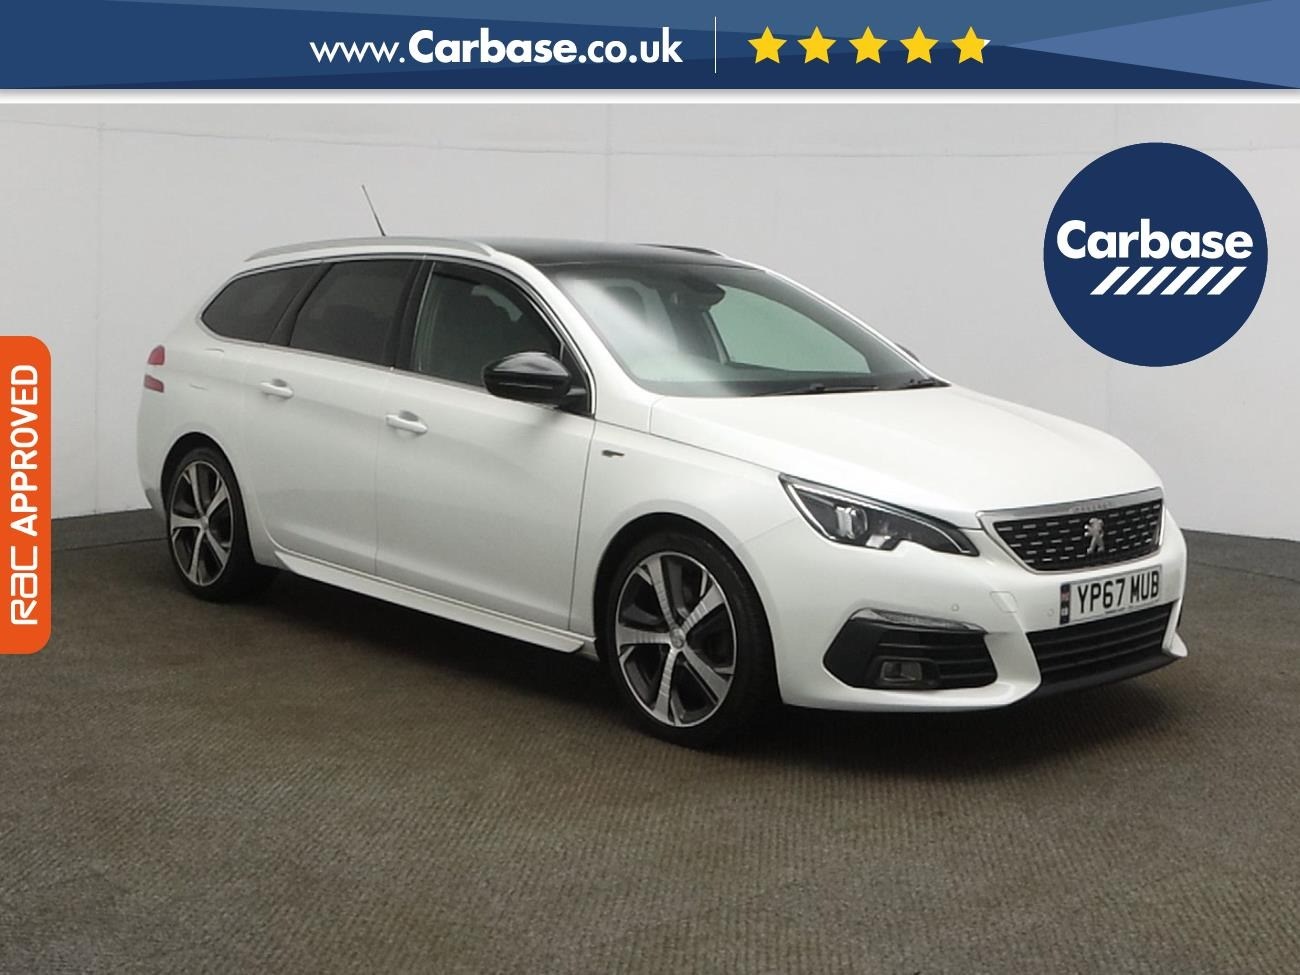 Peugeot 308 Cars for Sale in Bristol, Bath and Somerset - Carbase